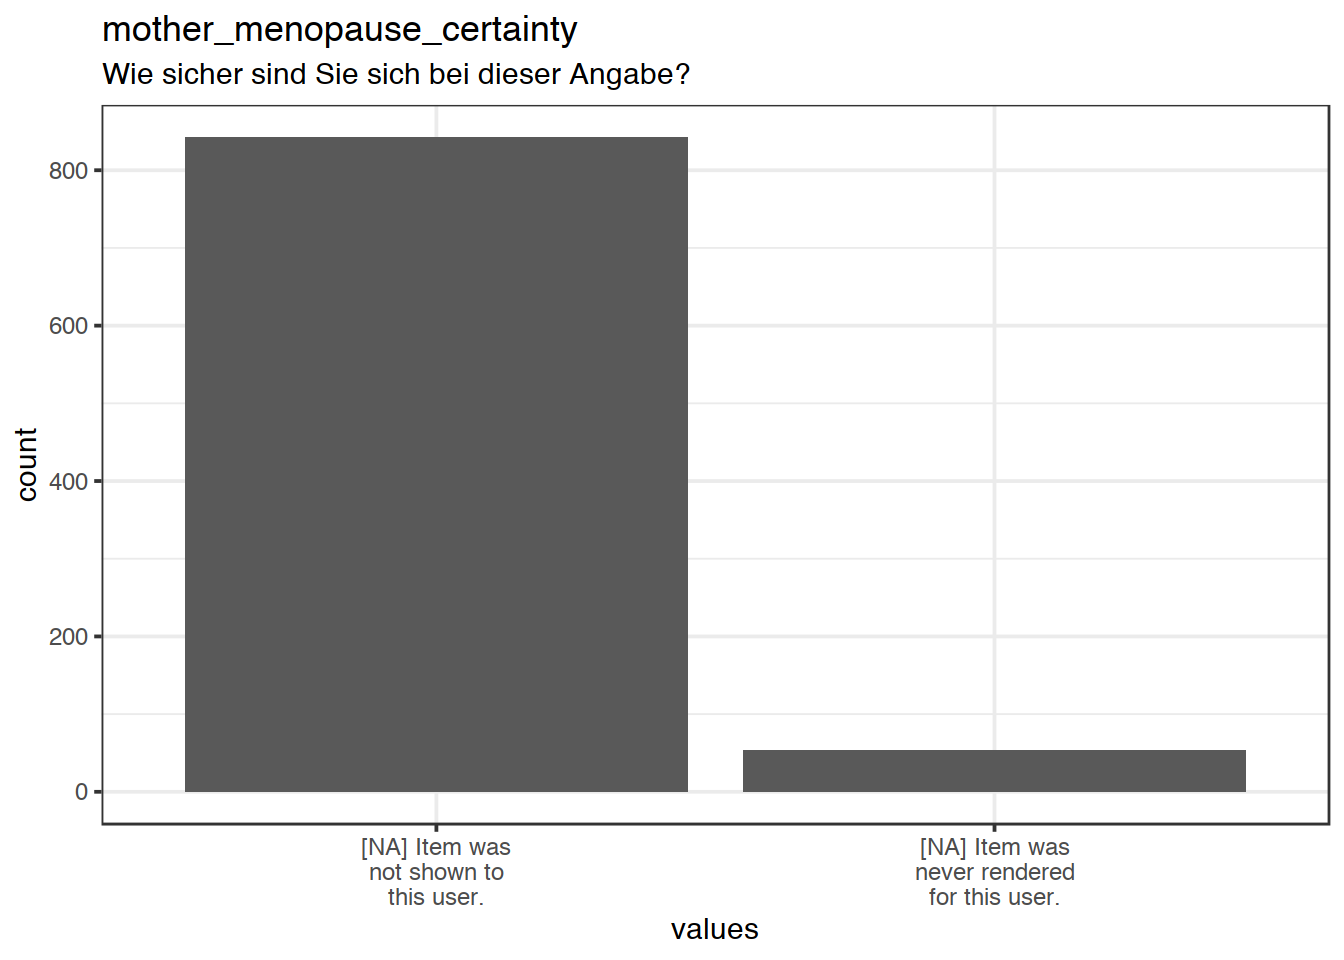 Plot of missing values for mother_menopause_certainty